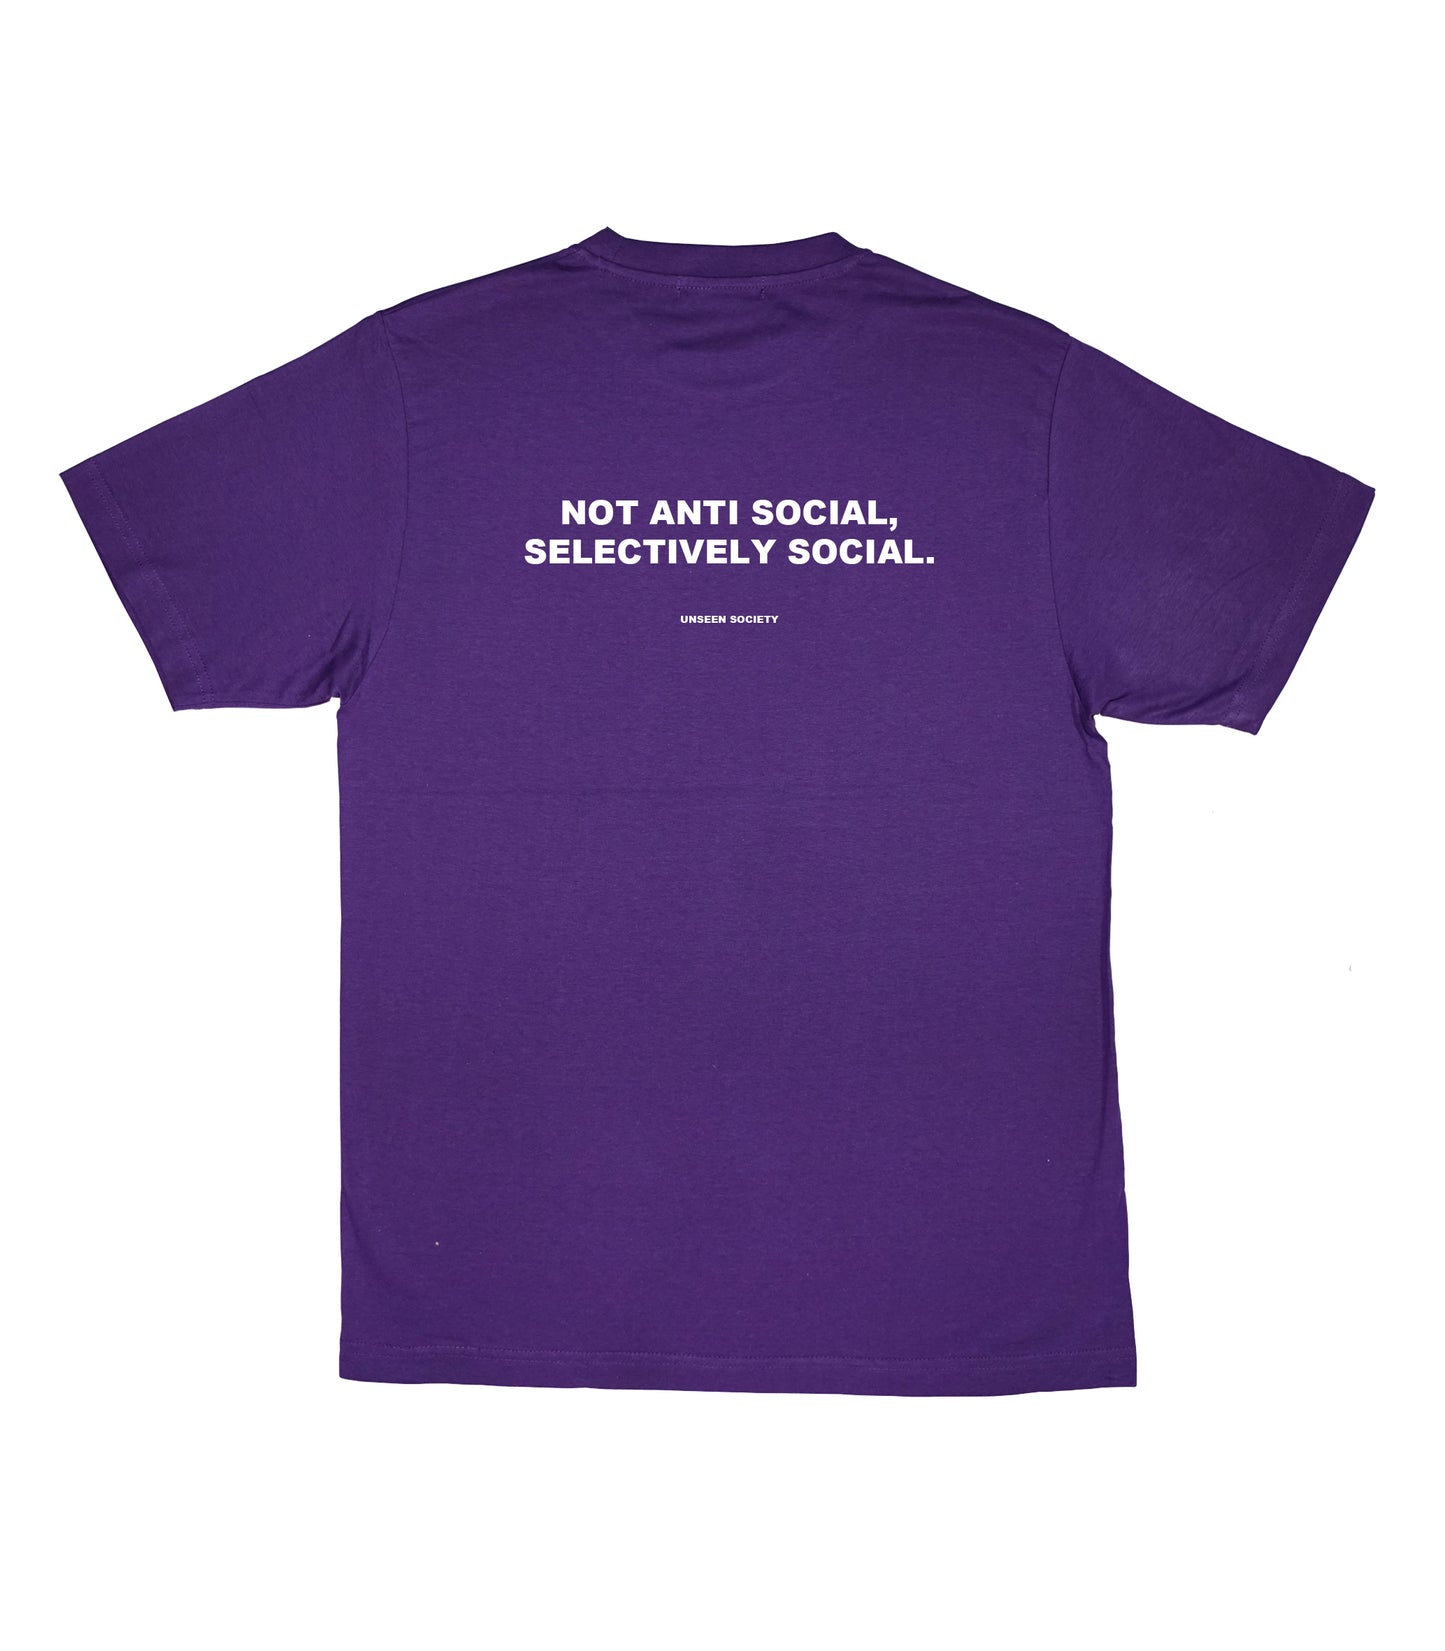 Not anti social quote tee